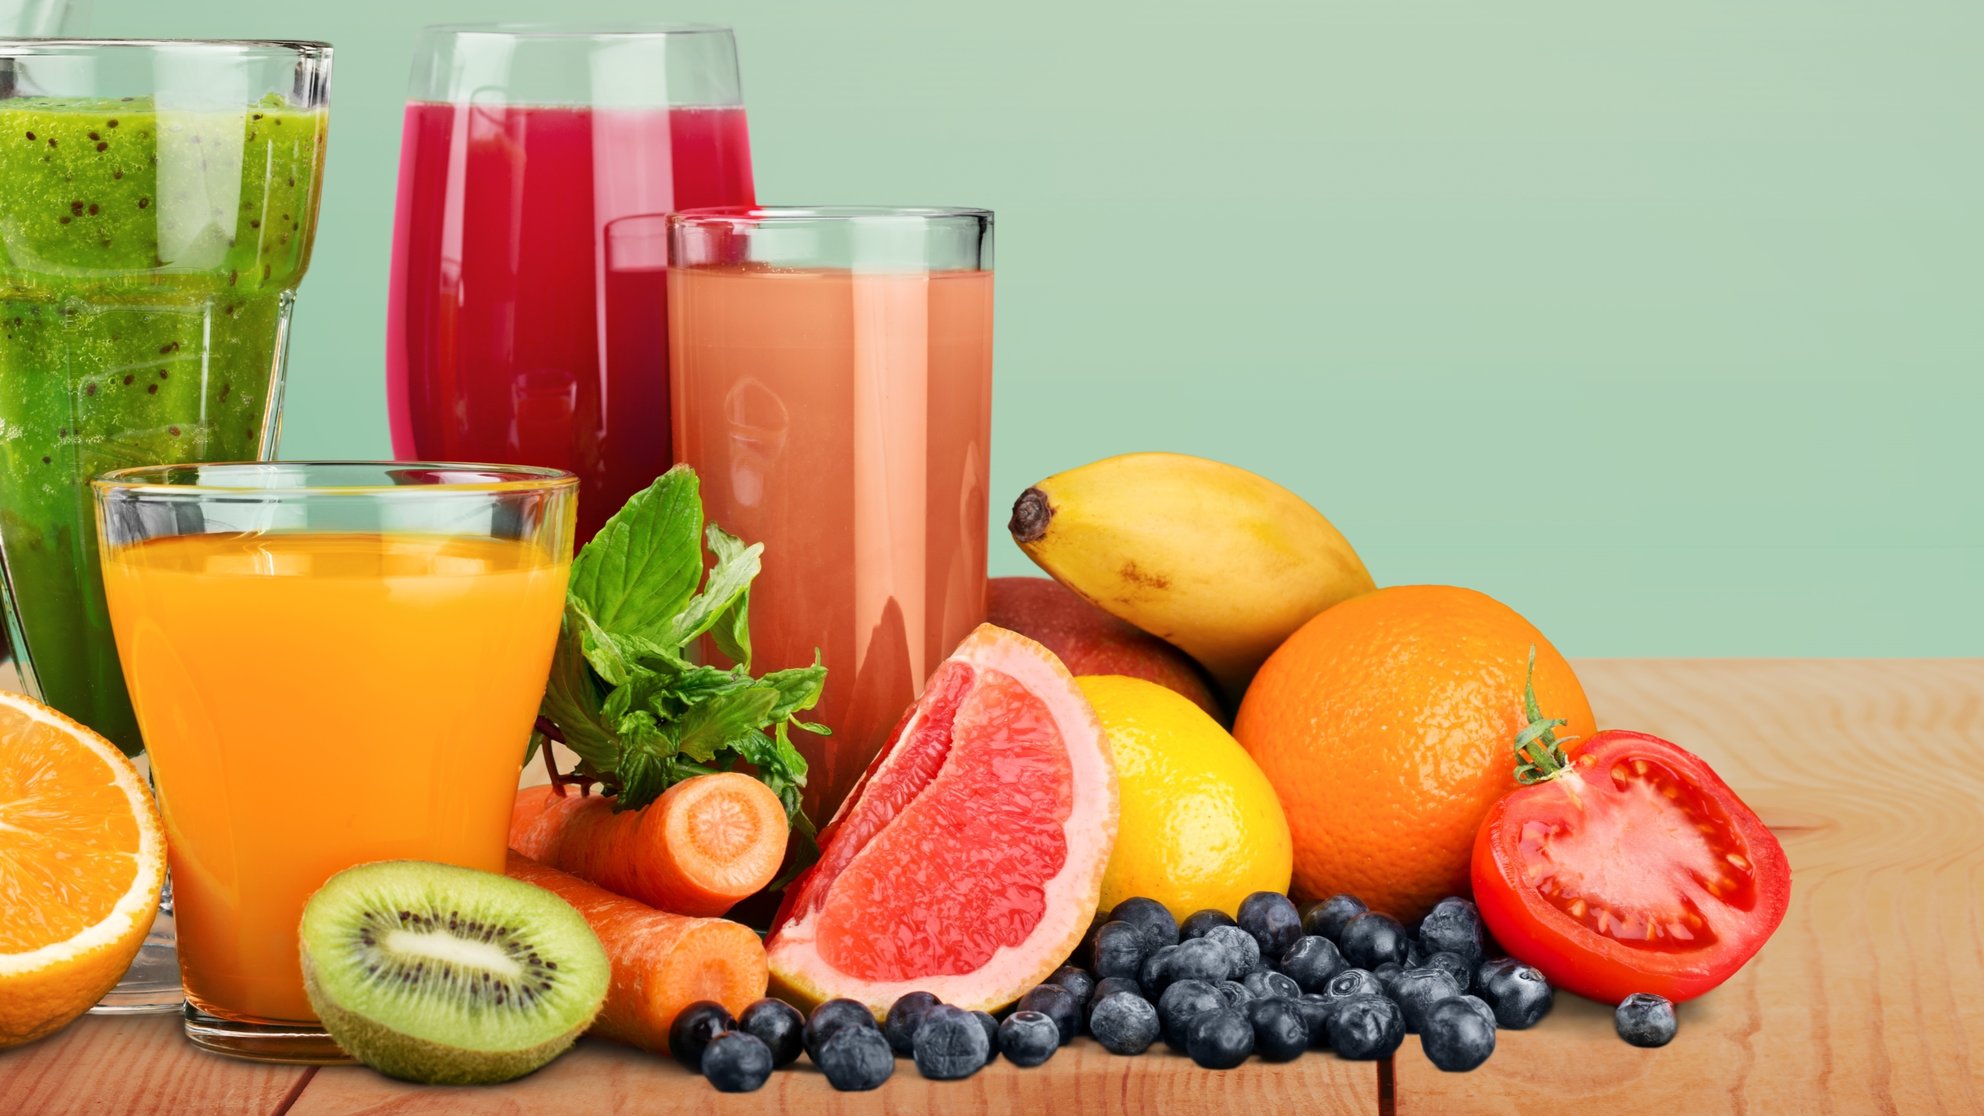 Juice or Smoothie: Which One Is Healthier? - Health